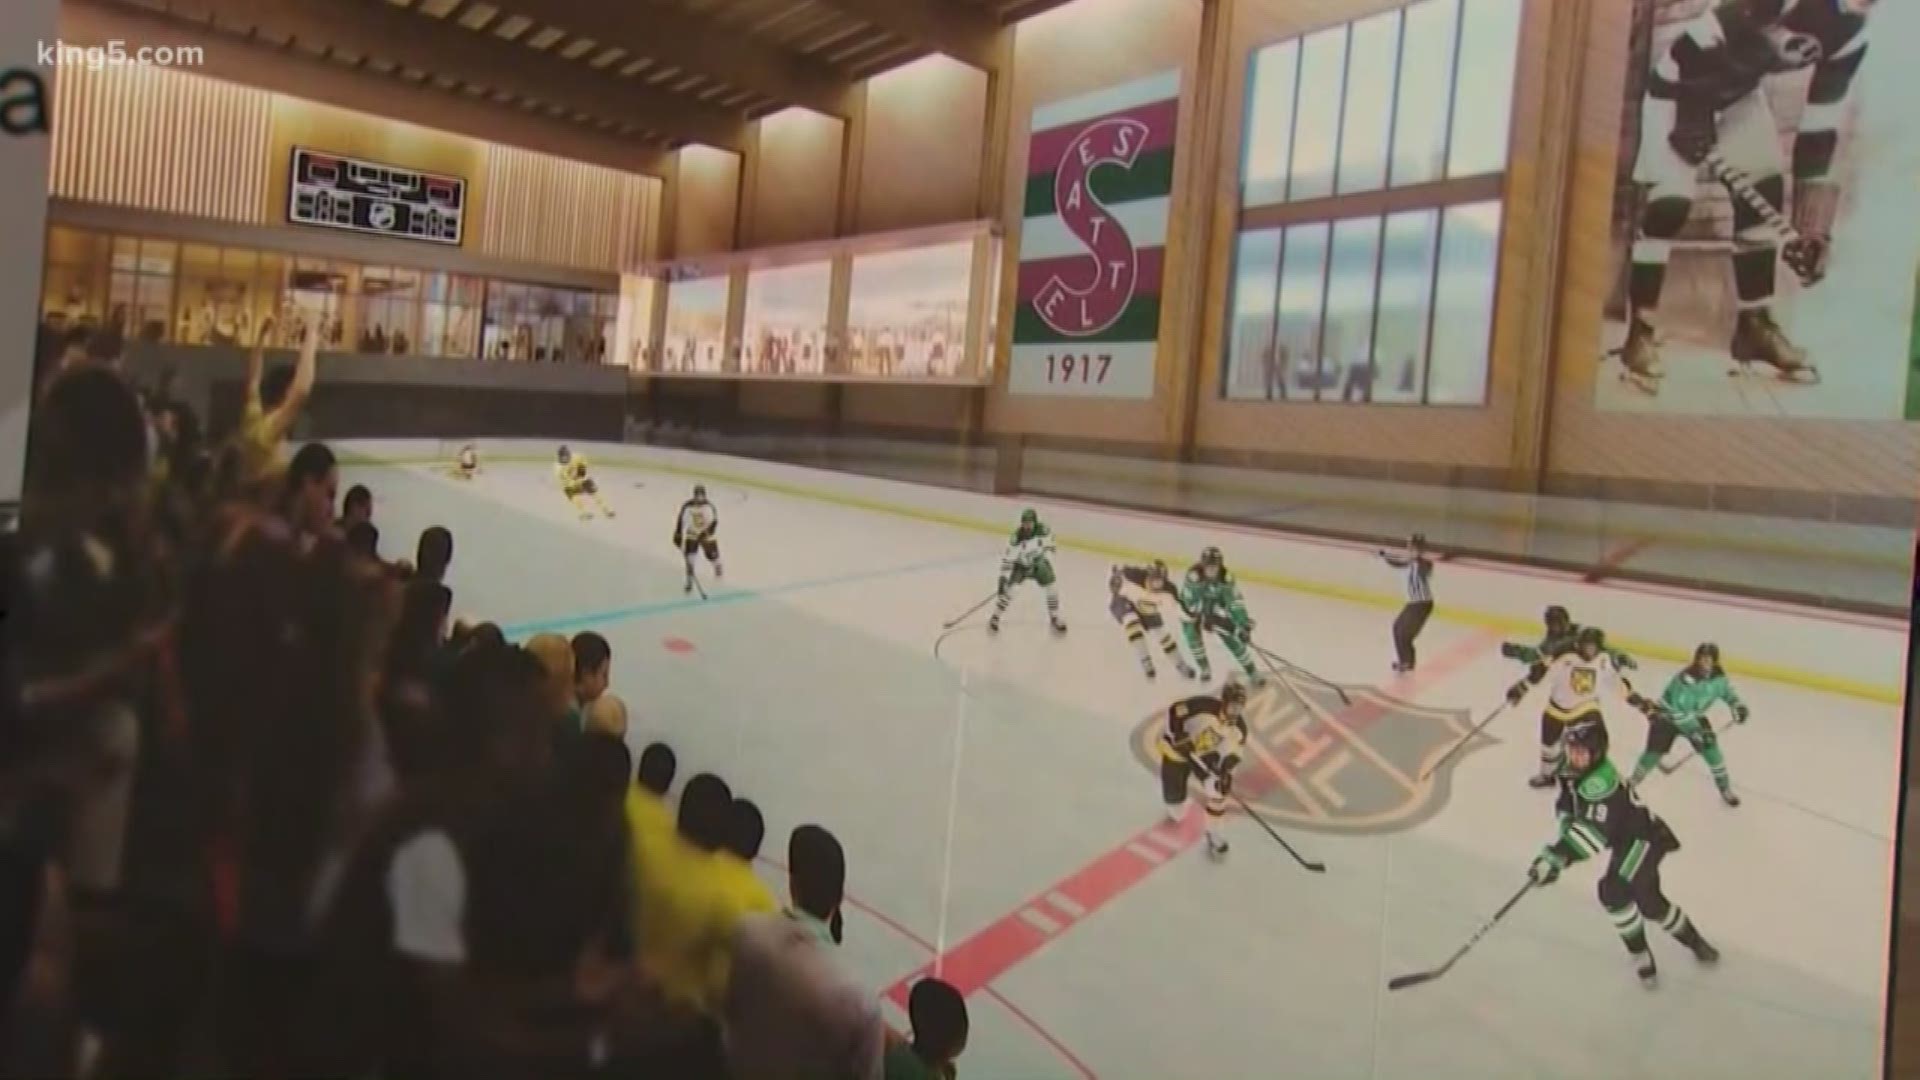 NHL Seattle leaders are showing off their plans for a new community ice center and training facility. KING 5's Chris Daniels went to the open house.